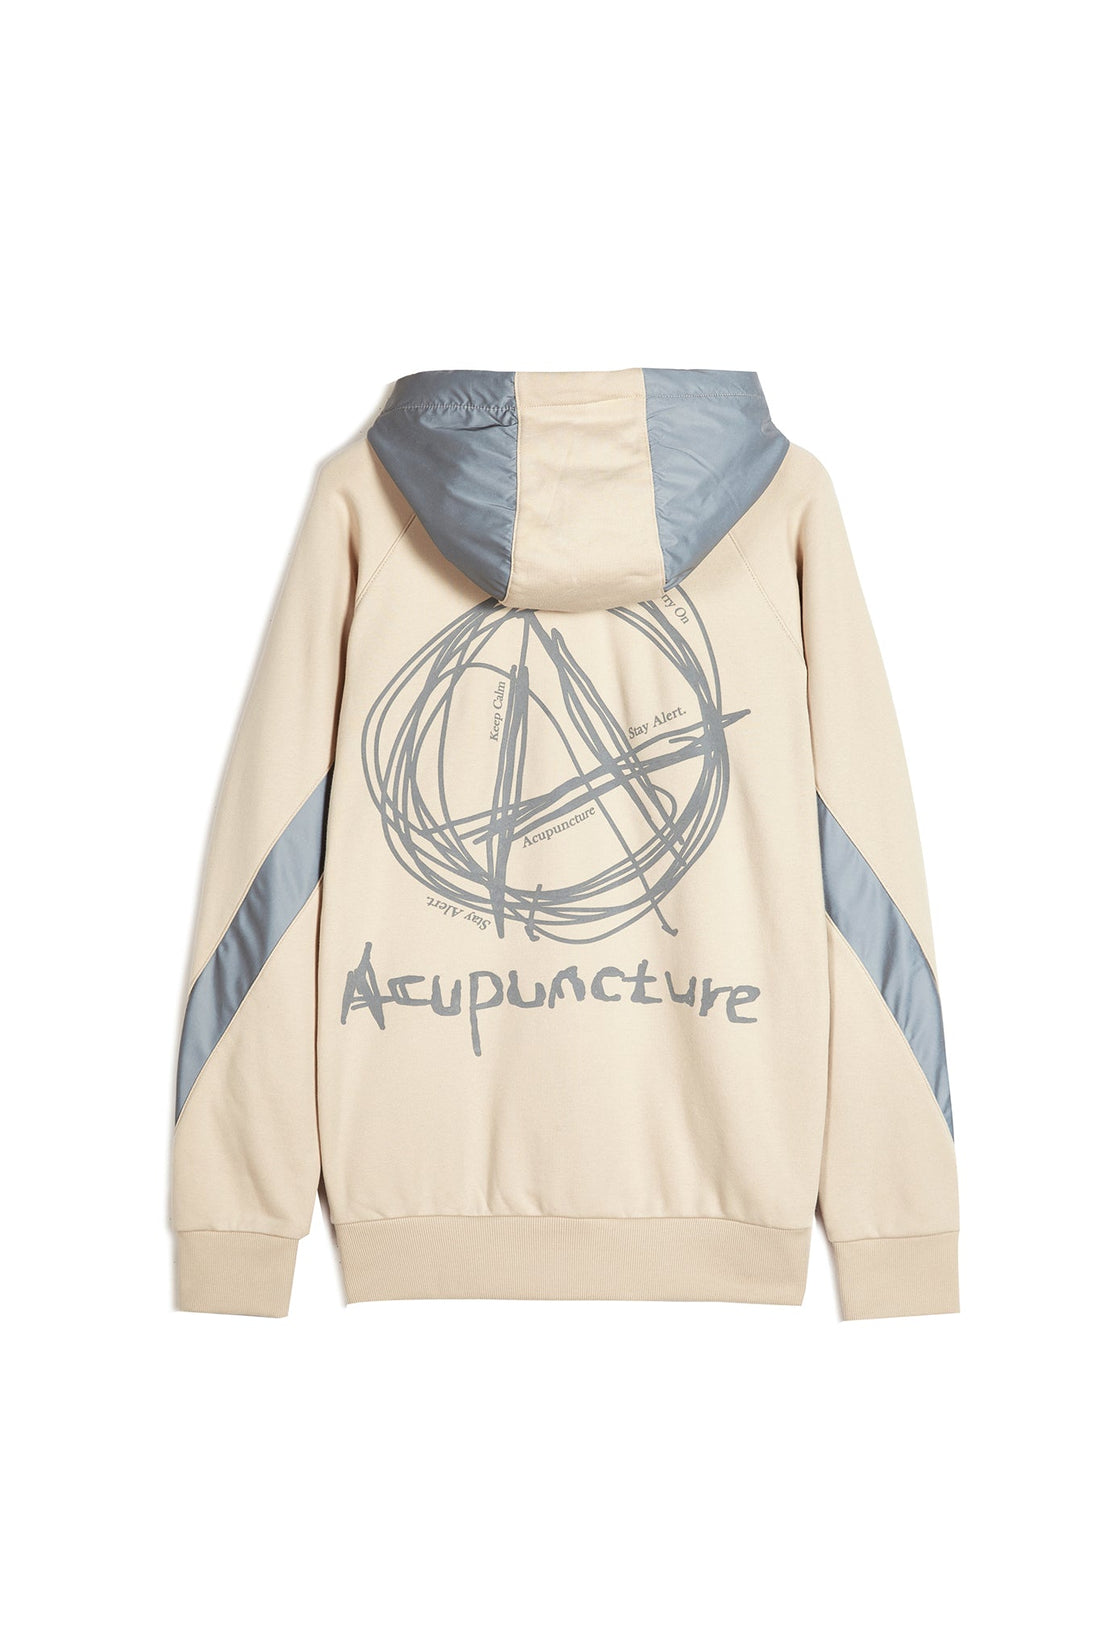 A HOODIE KHAKI Acupuncture